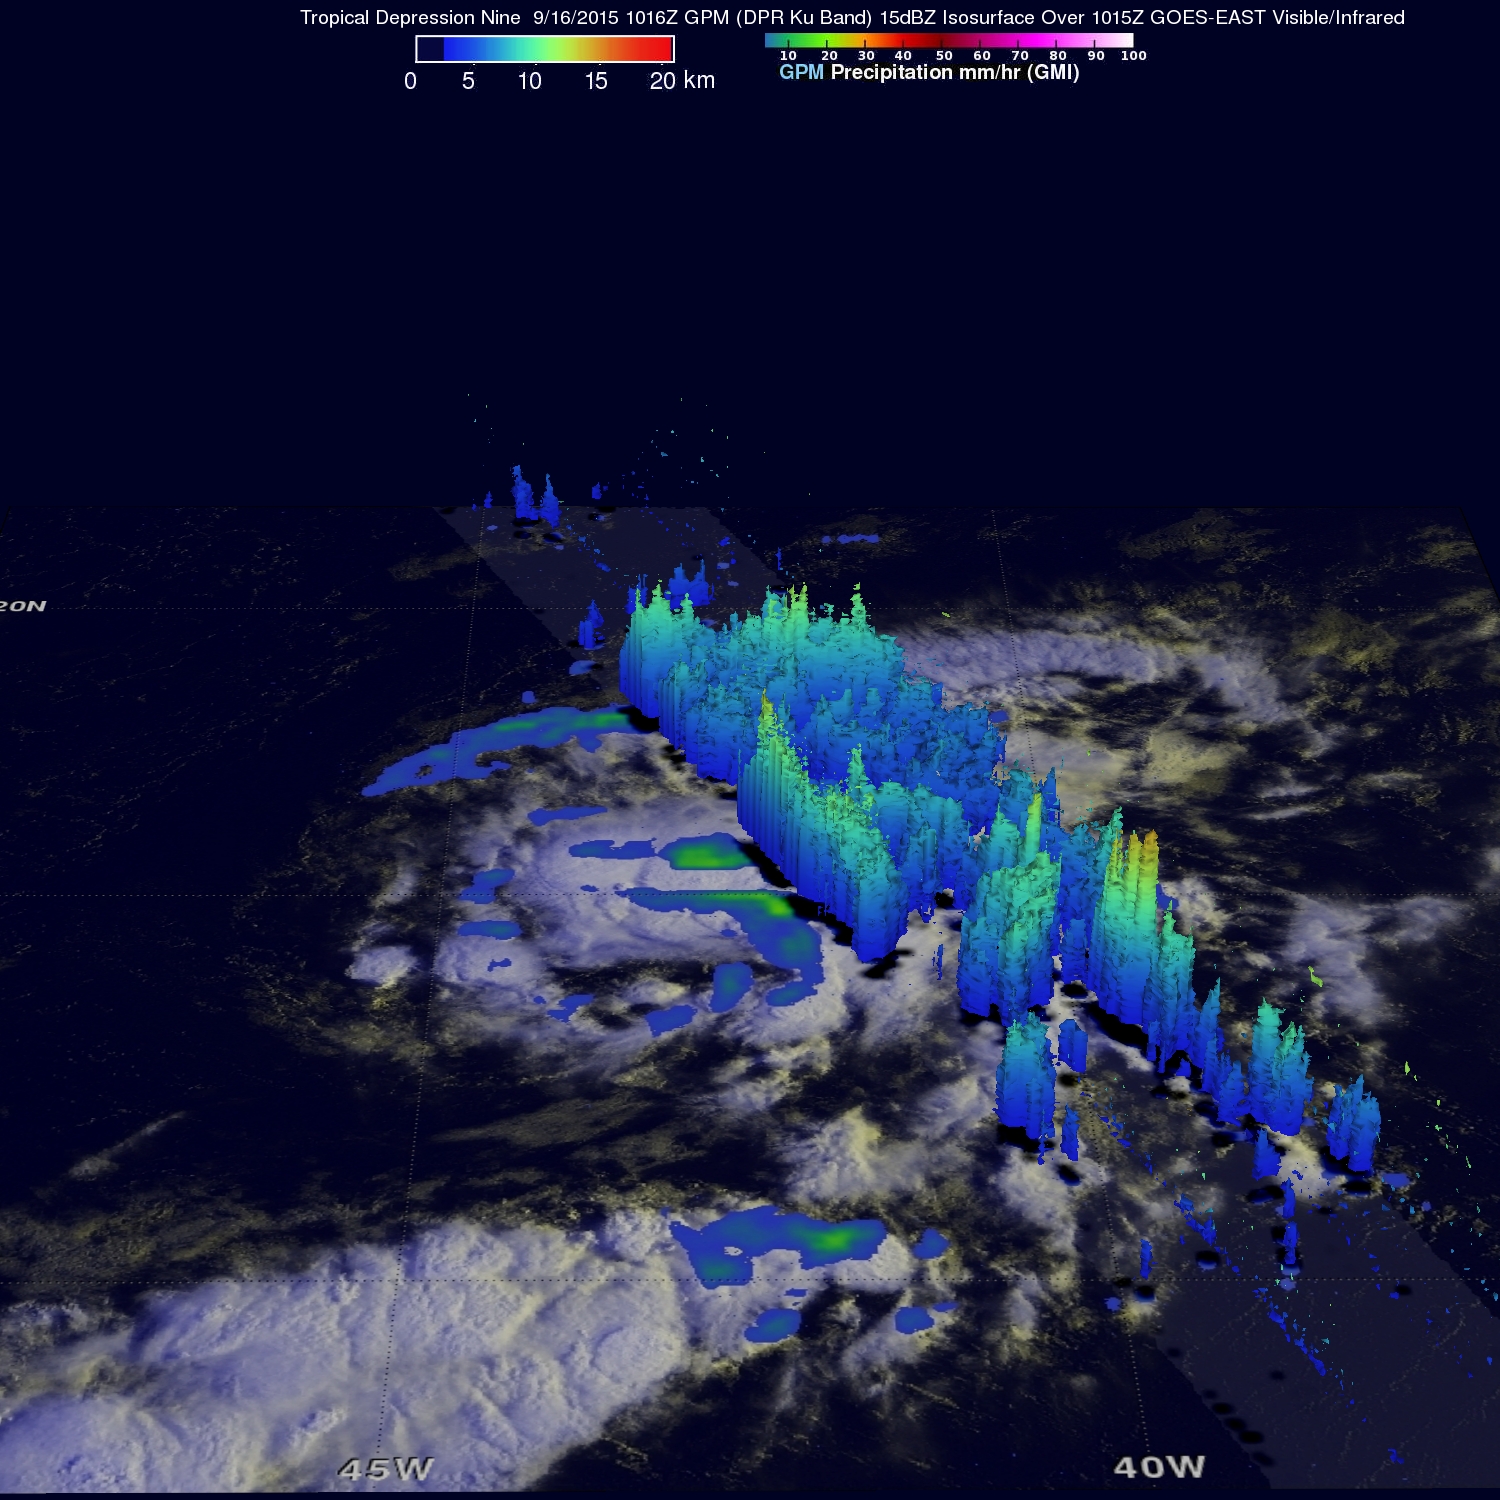 GPM image of TD9